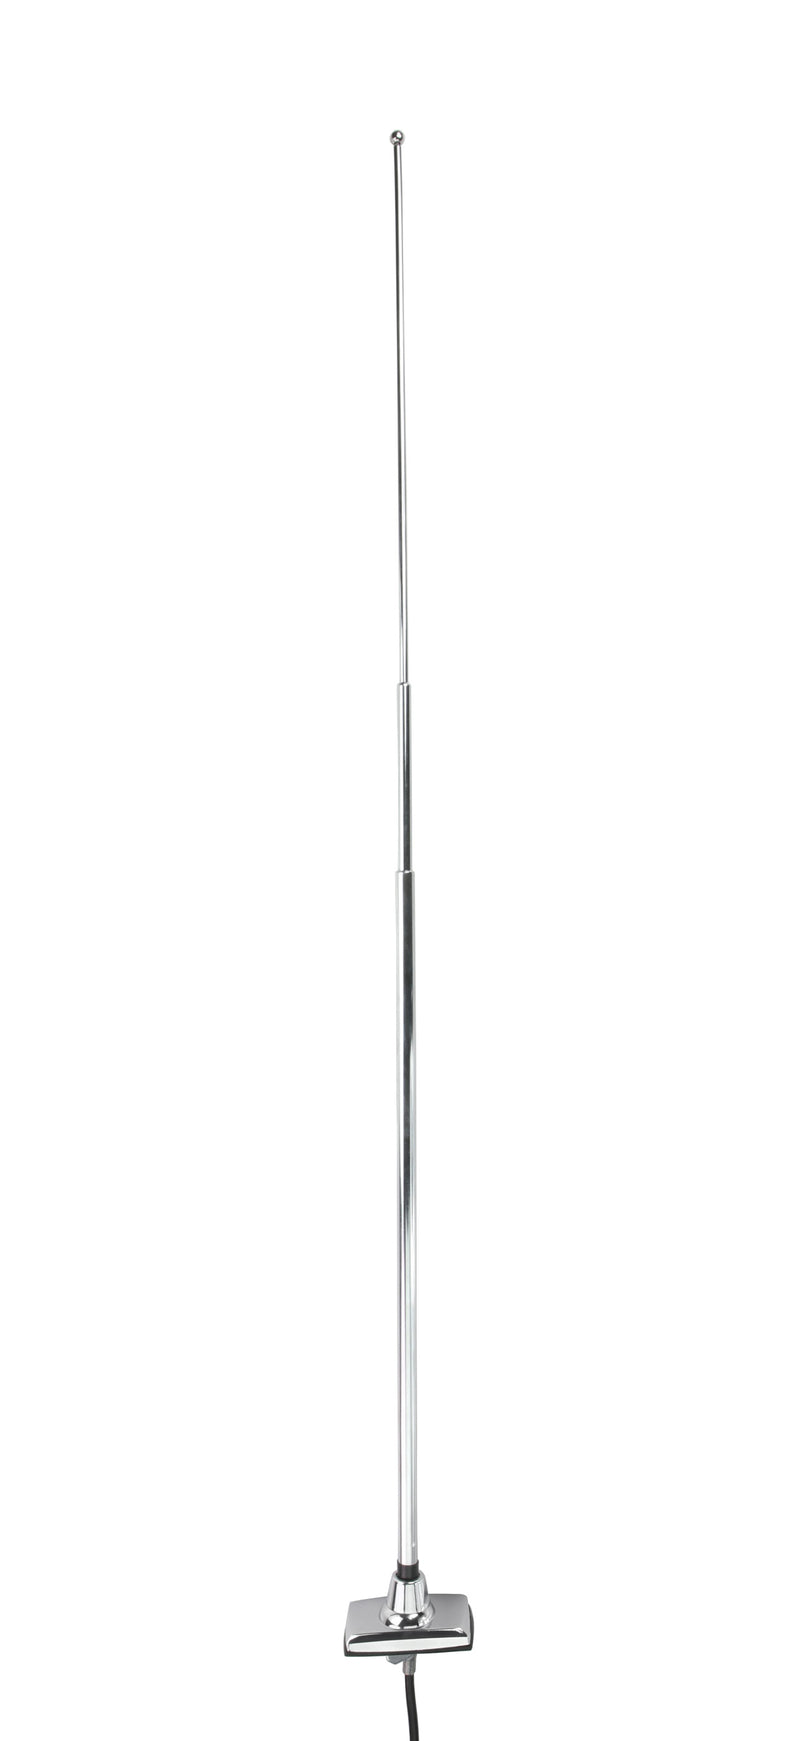 1980-96 Ford F-Series Truck Replacement Antenna